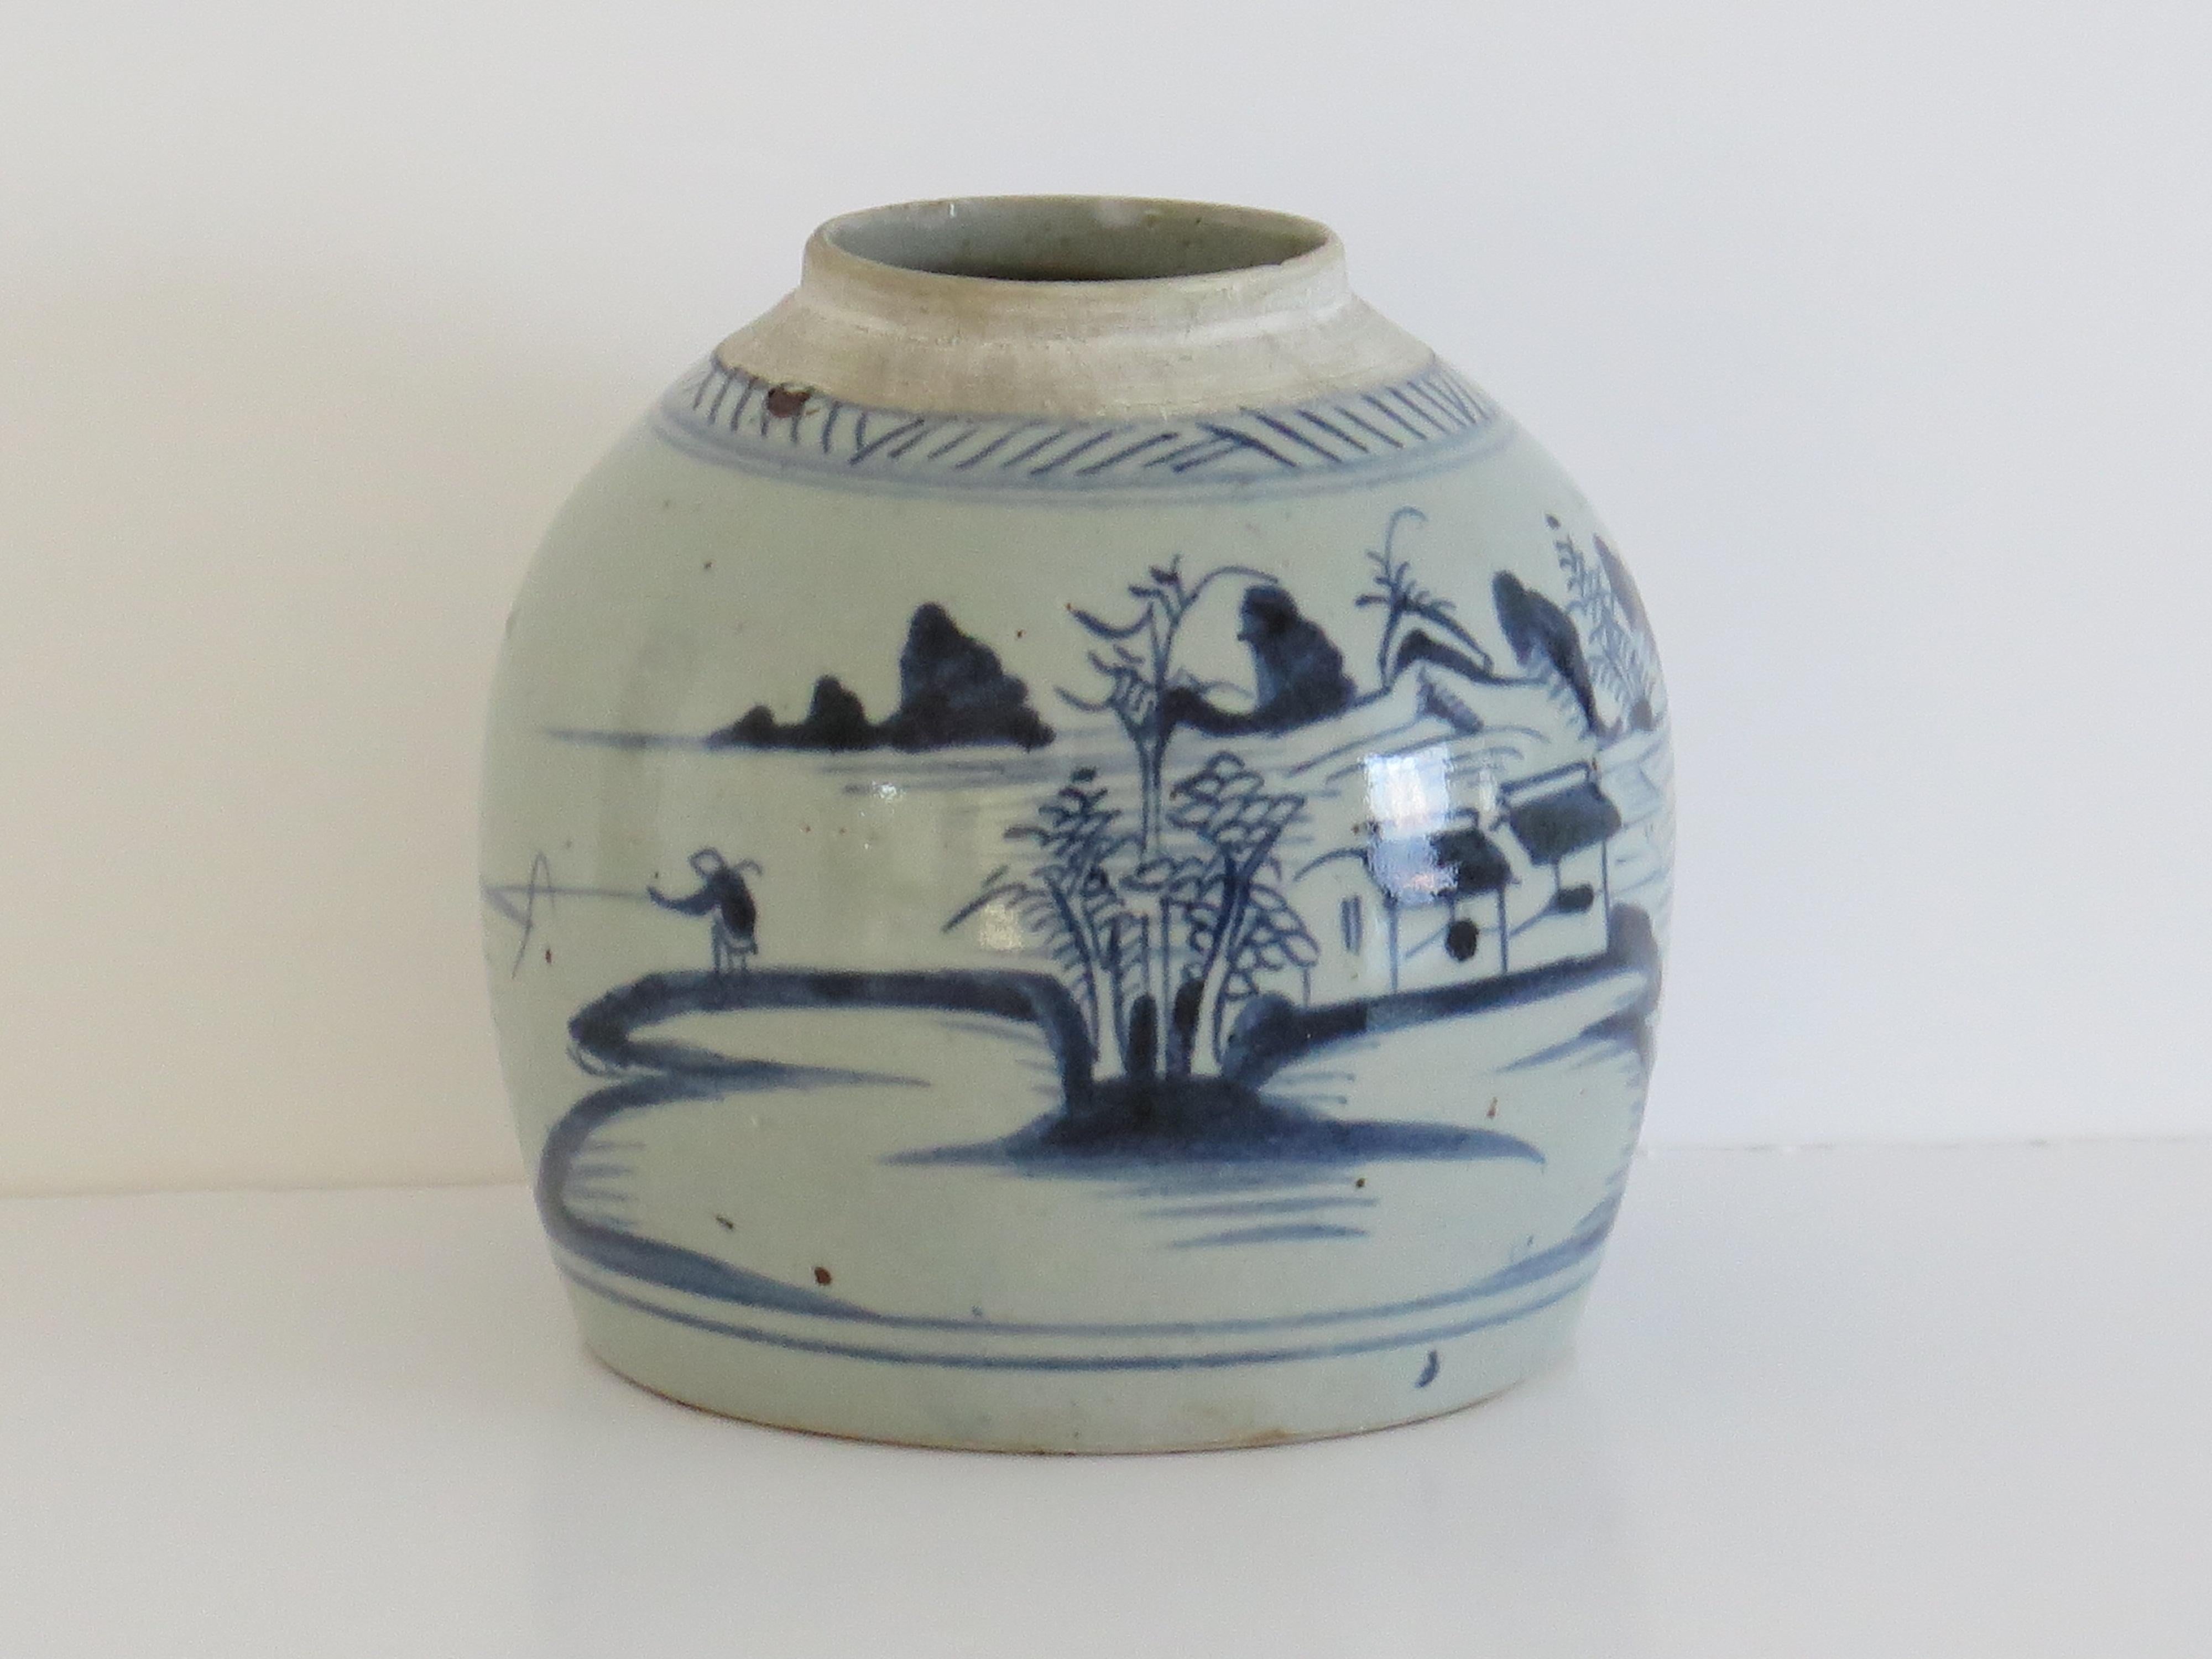 This is a heavy Chinese Export porcelain jar hand painted with a blue and white lakeside scene and dating to the late 18th century, Qing dynasty.

This is a well potted piece with a very decorative squat shape and a glassy glaze having a blue